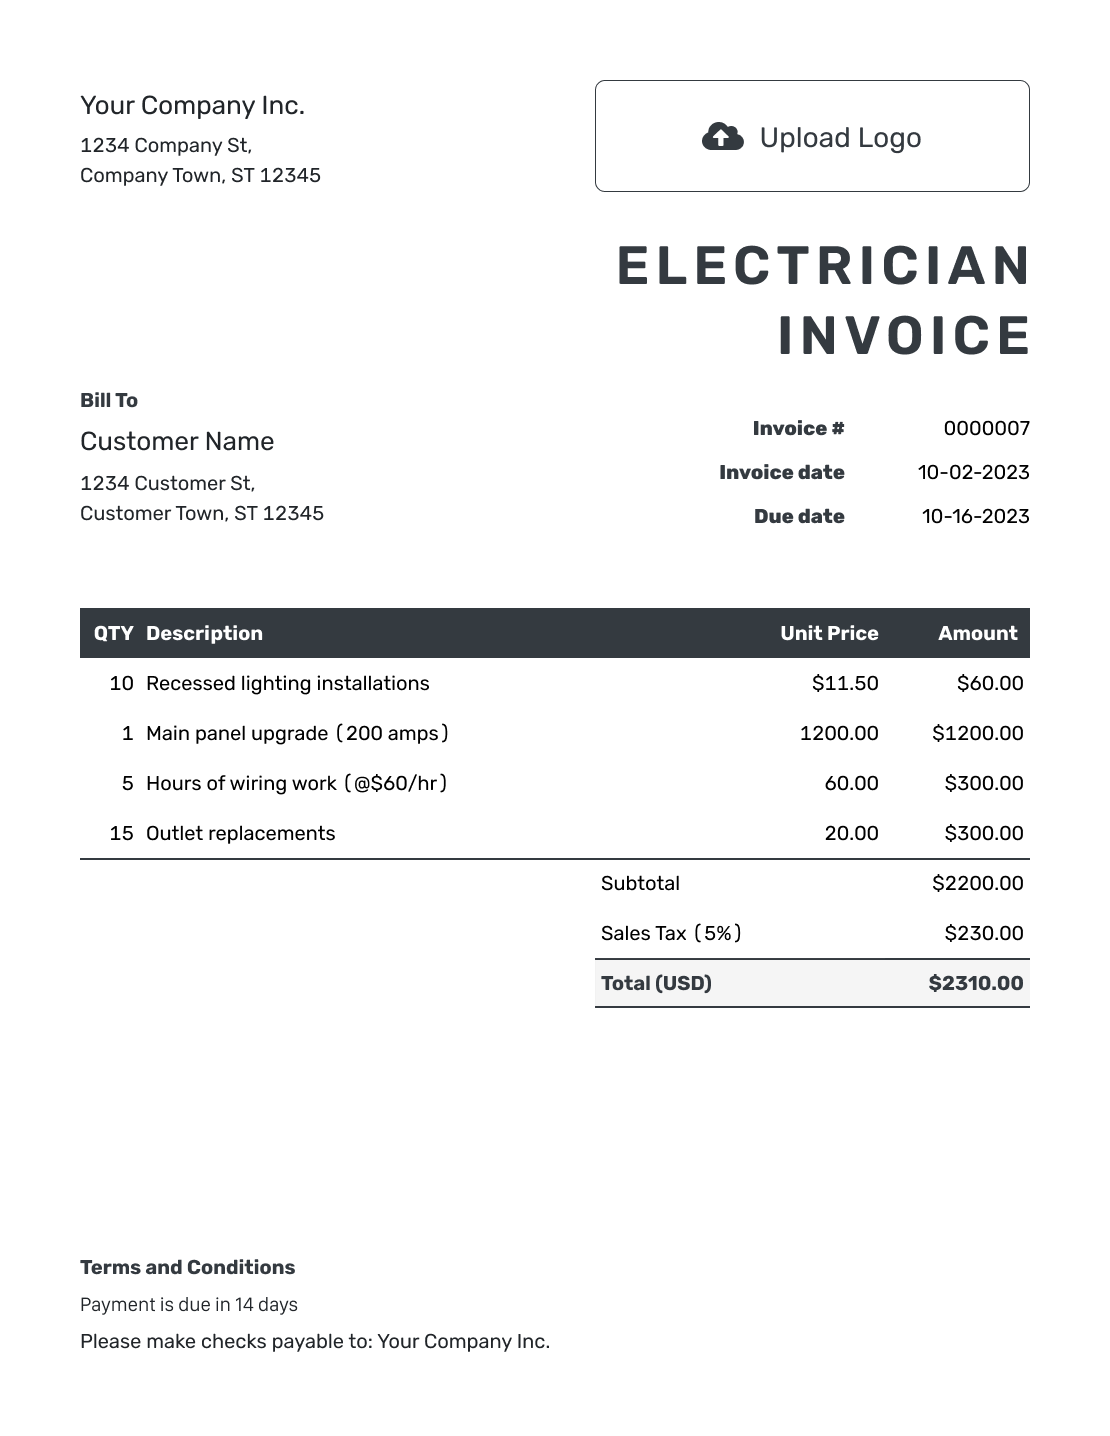 Hourly Electrician Invoice Template